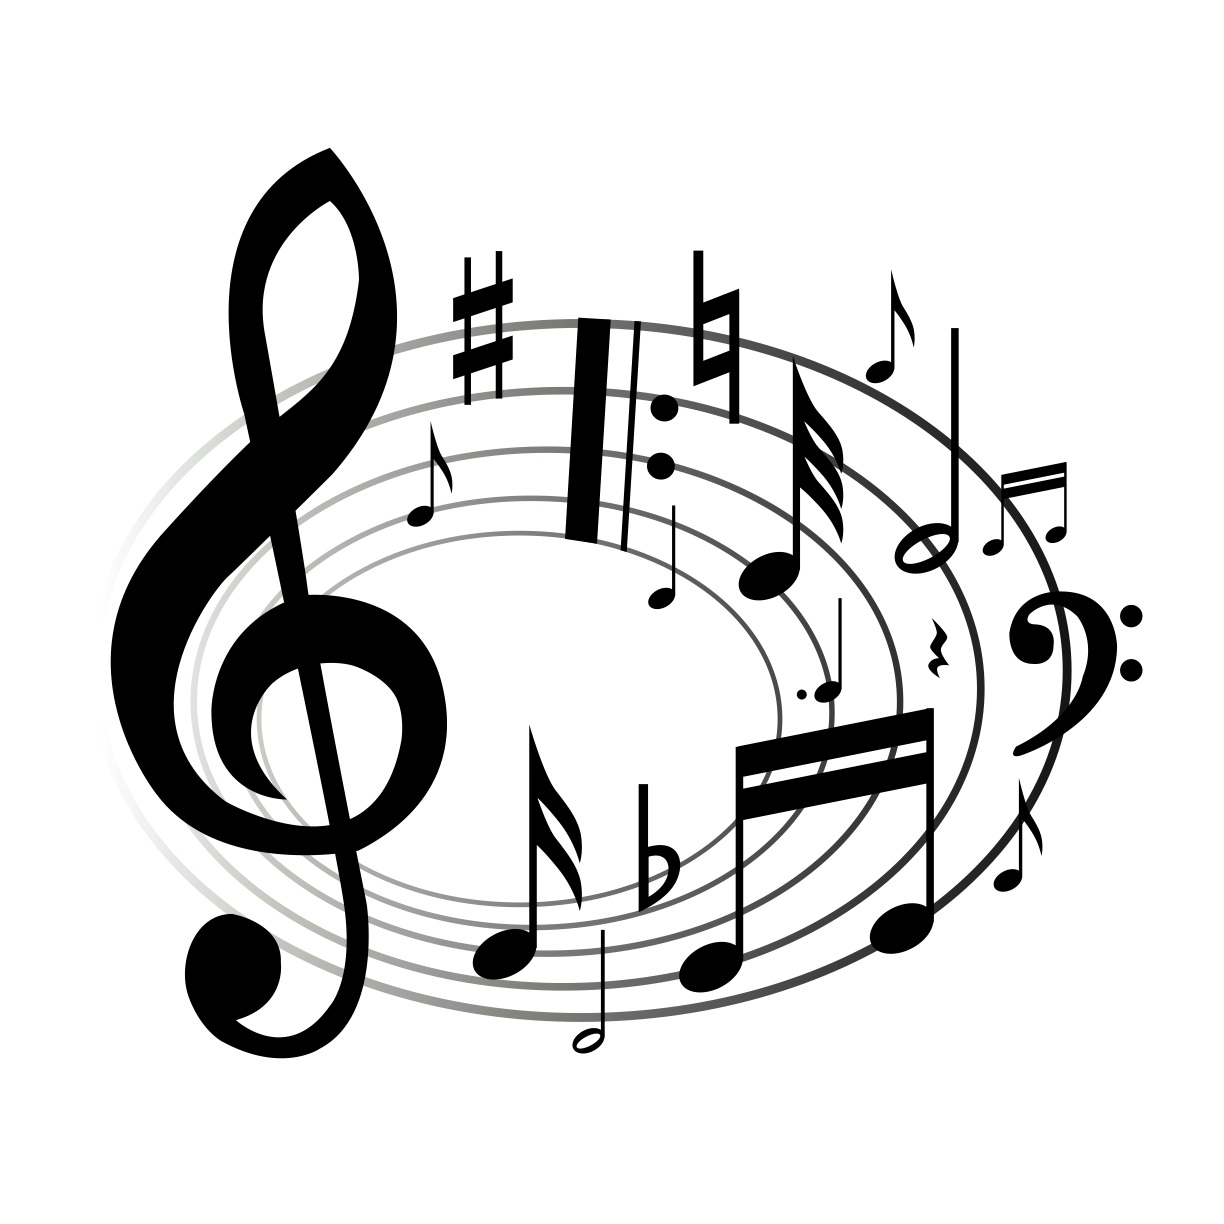 Music Notes clipart #10, Download drawings